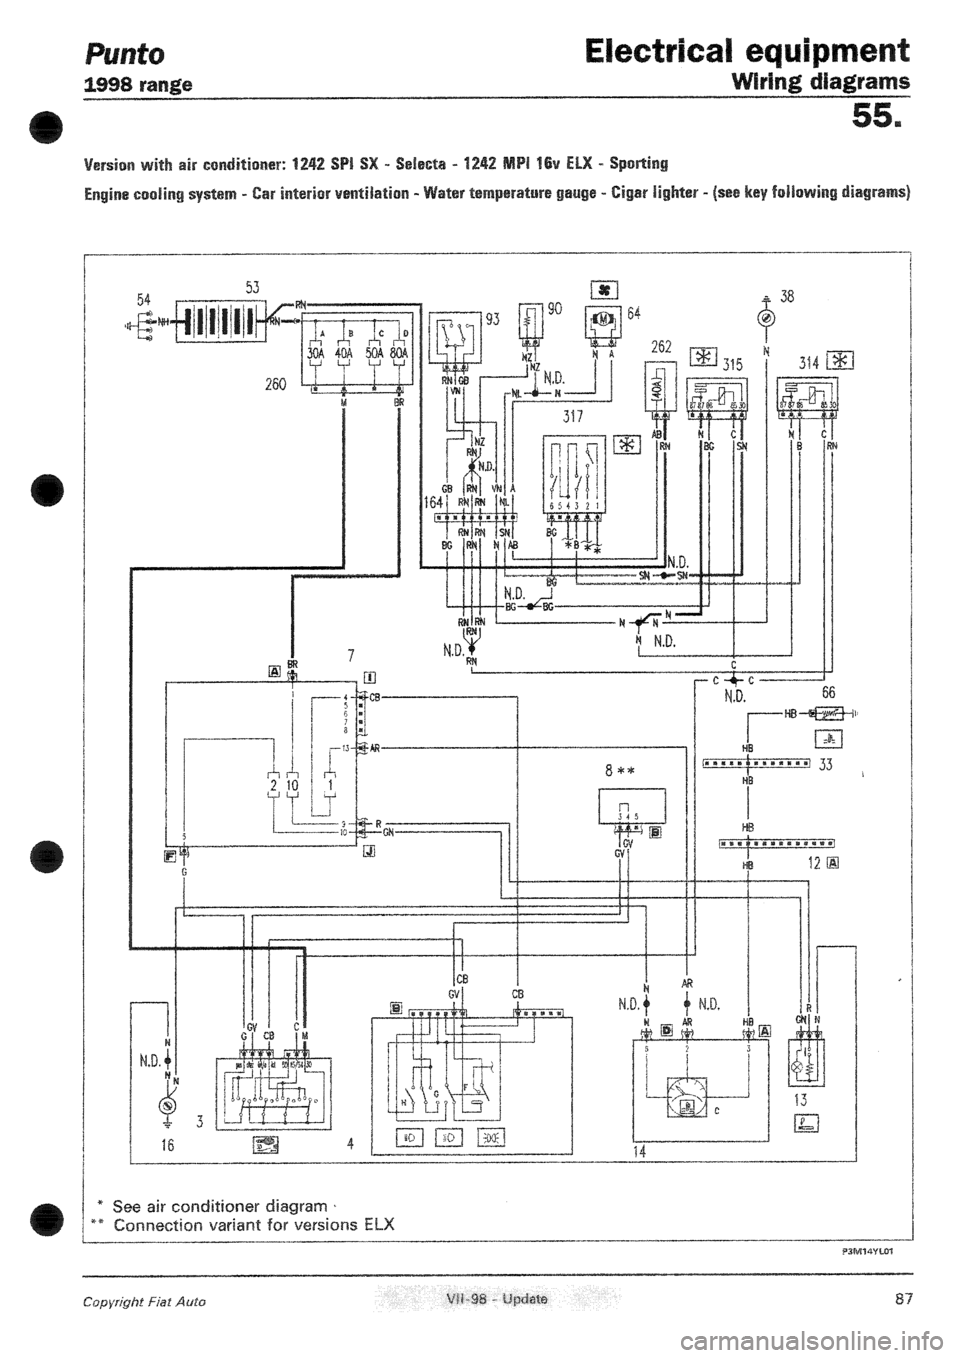 FIAT PUNTO 1998 176 / 1.G Wiring Diagrams Owners Manual 